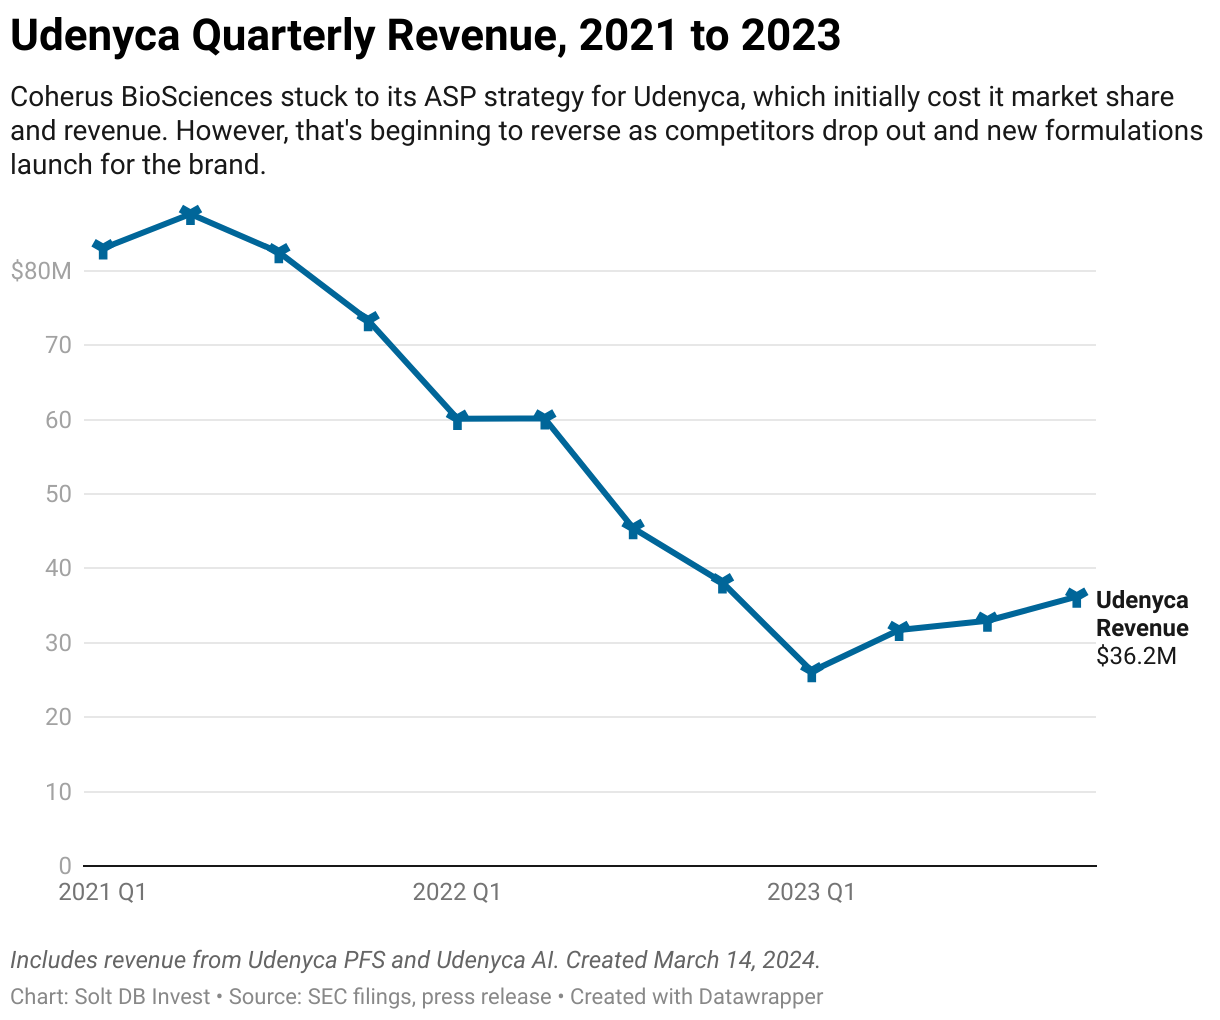 A line chart showing Udenyca product revenue from Q1 2021 to Q4 2023.